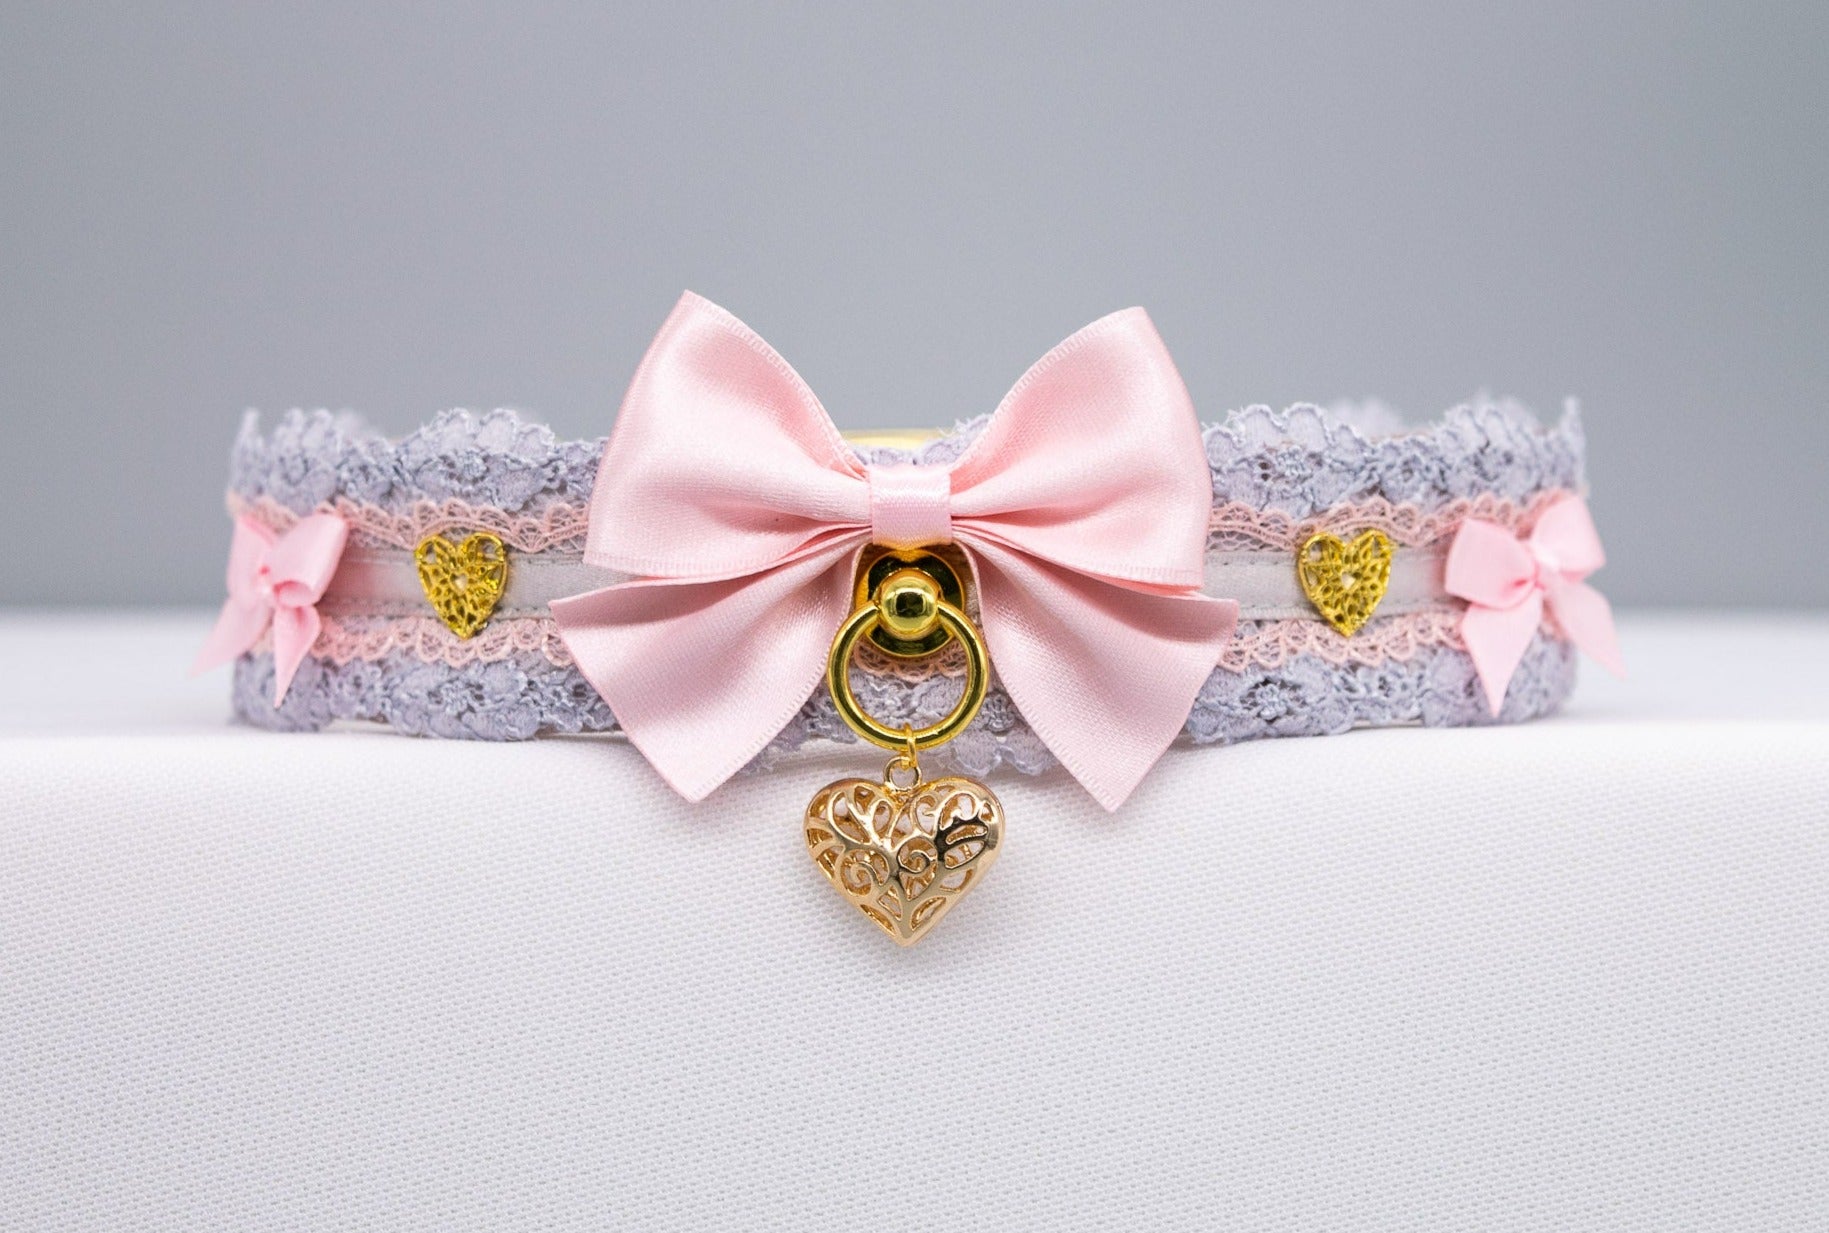 Amelie's Armored Heart - Luxury Collar in Dusty Lilac, Blush and Gold